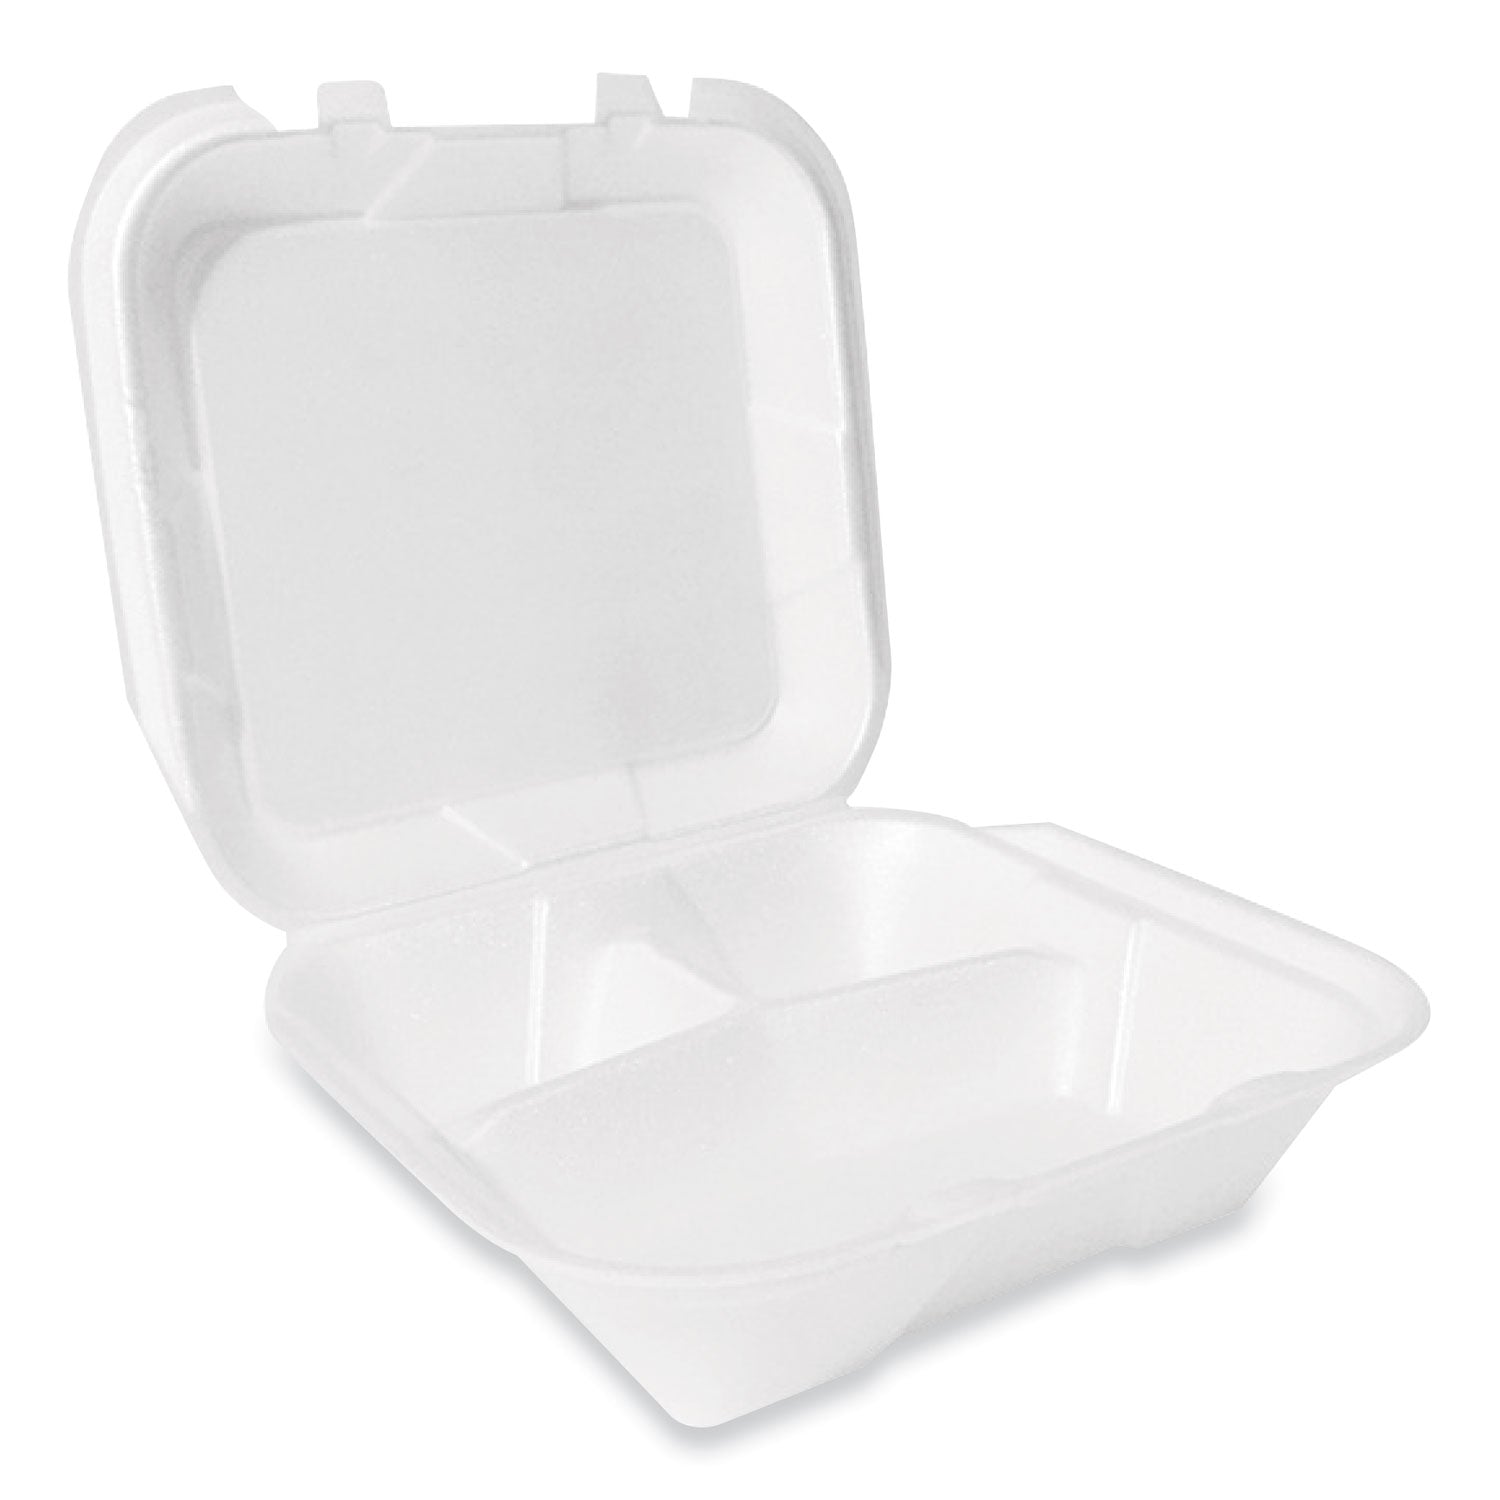 foam-hinged-lid-container-secure-two-tab-latch-poly-bag-3-compartment-9-x-9-x-3-white-100-bag-2-bags-carton_pst12094 - 1